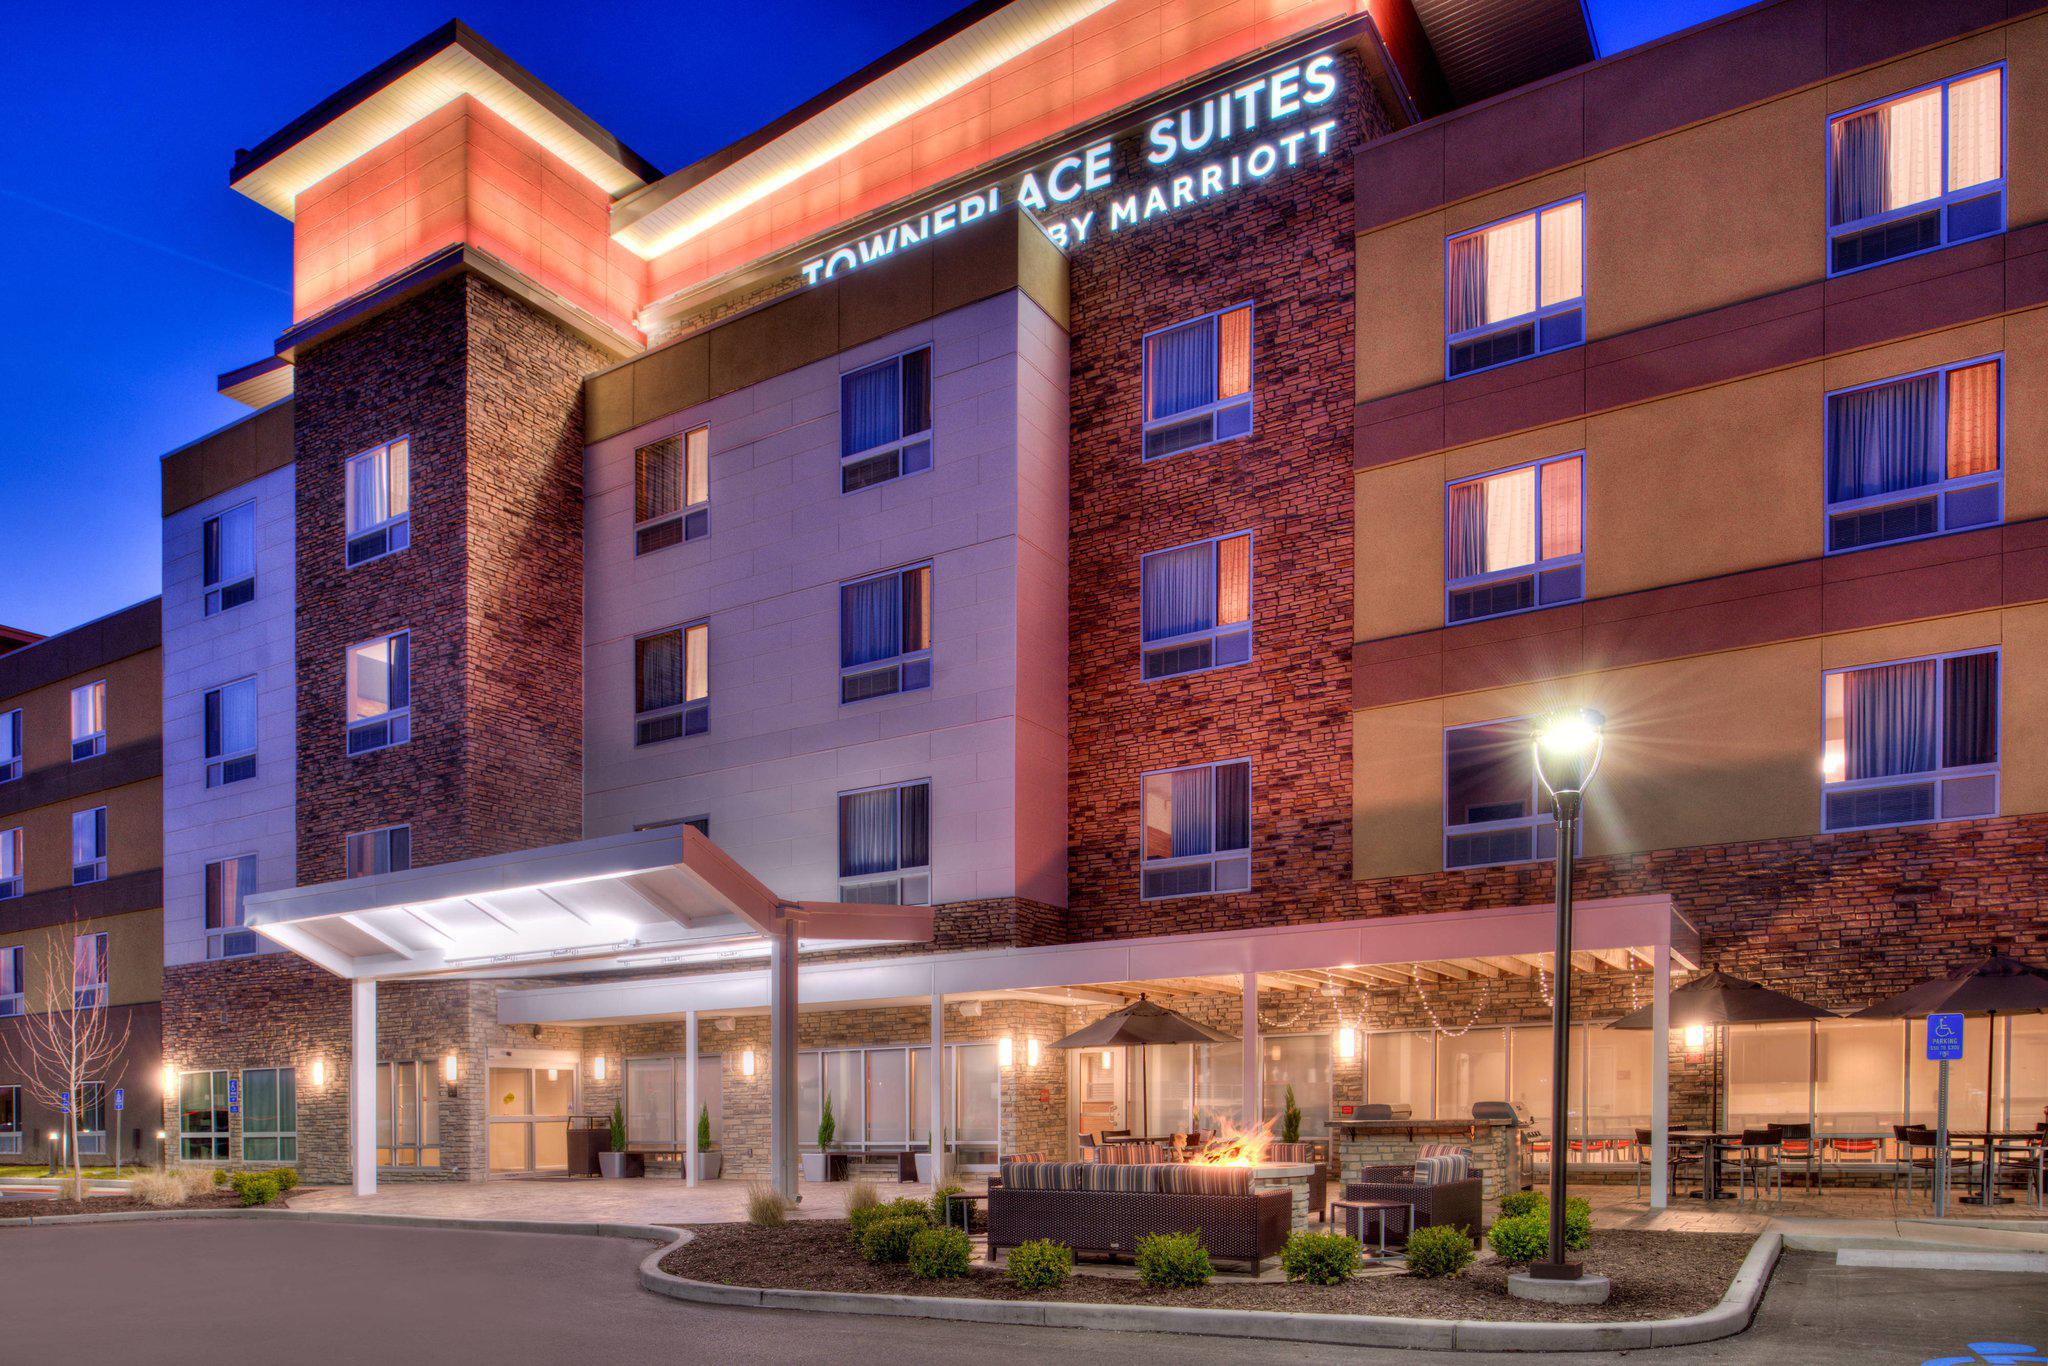 TownePlace Suites by Marriott St. Louis Chesterfield Photo